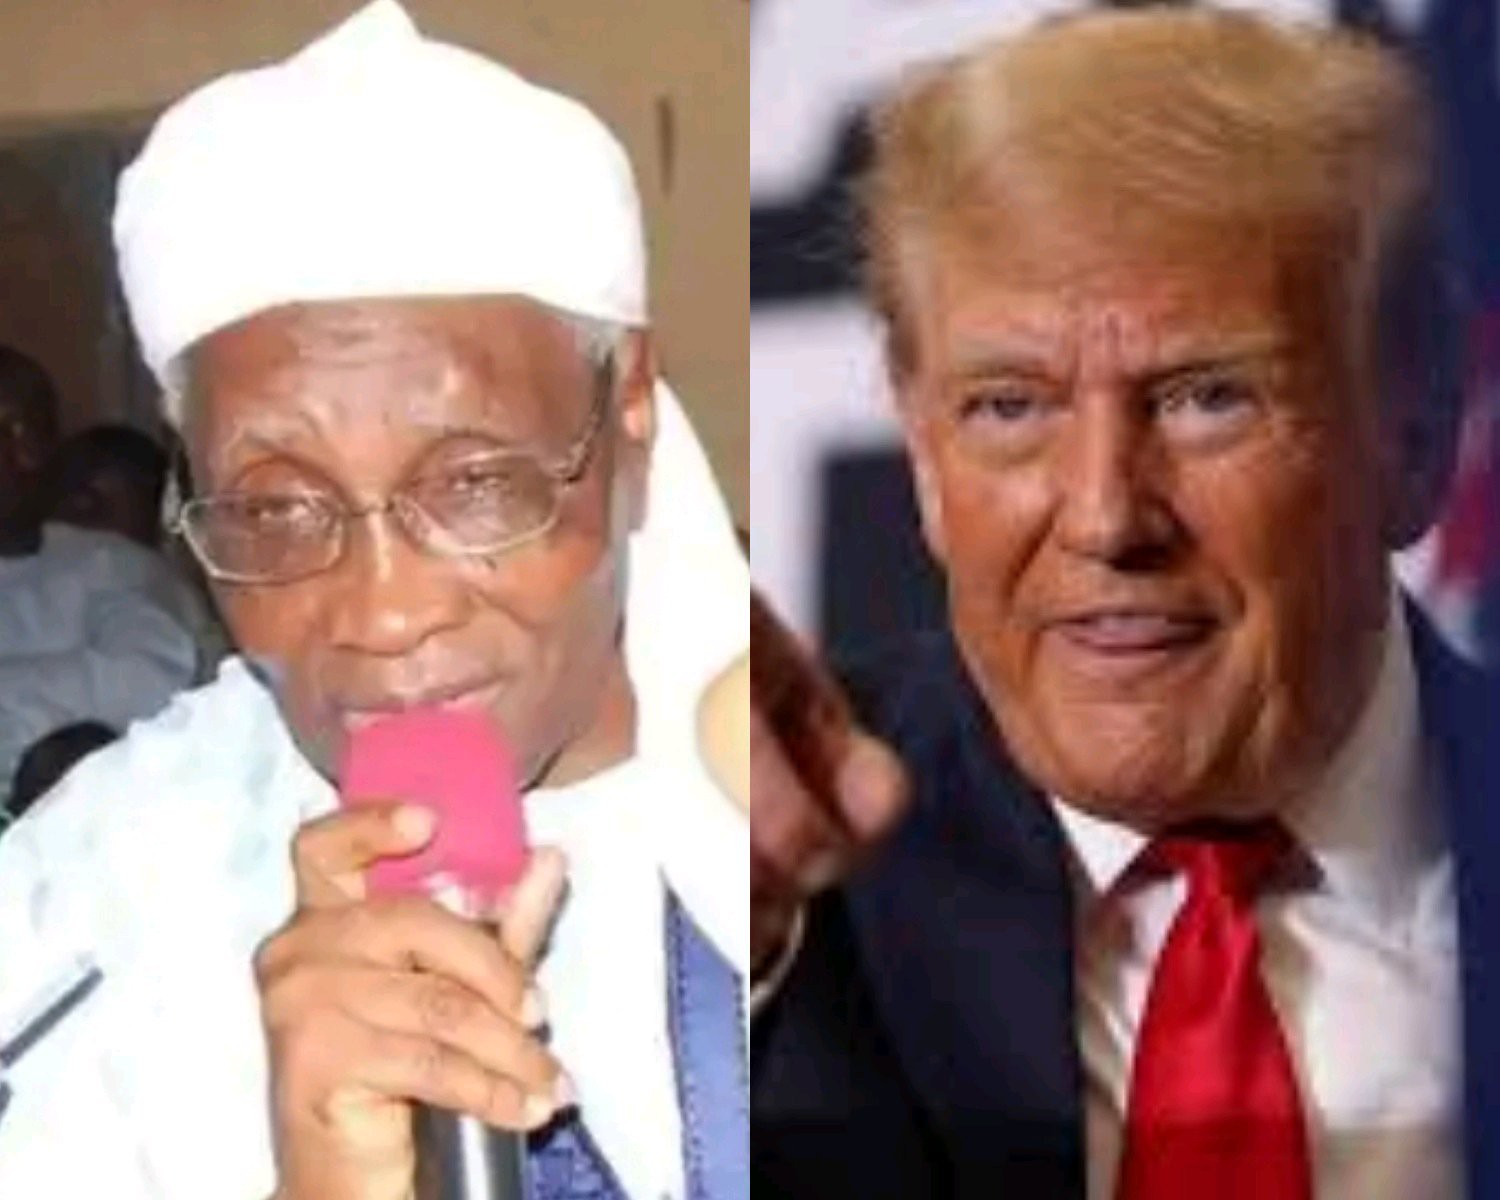 Ex-President Trump was brought before a Magistrate in handcuffs because the judge insisted—According to Ango Abdullahi